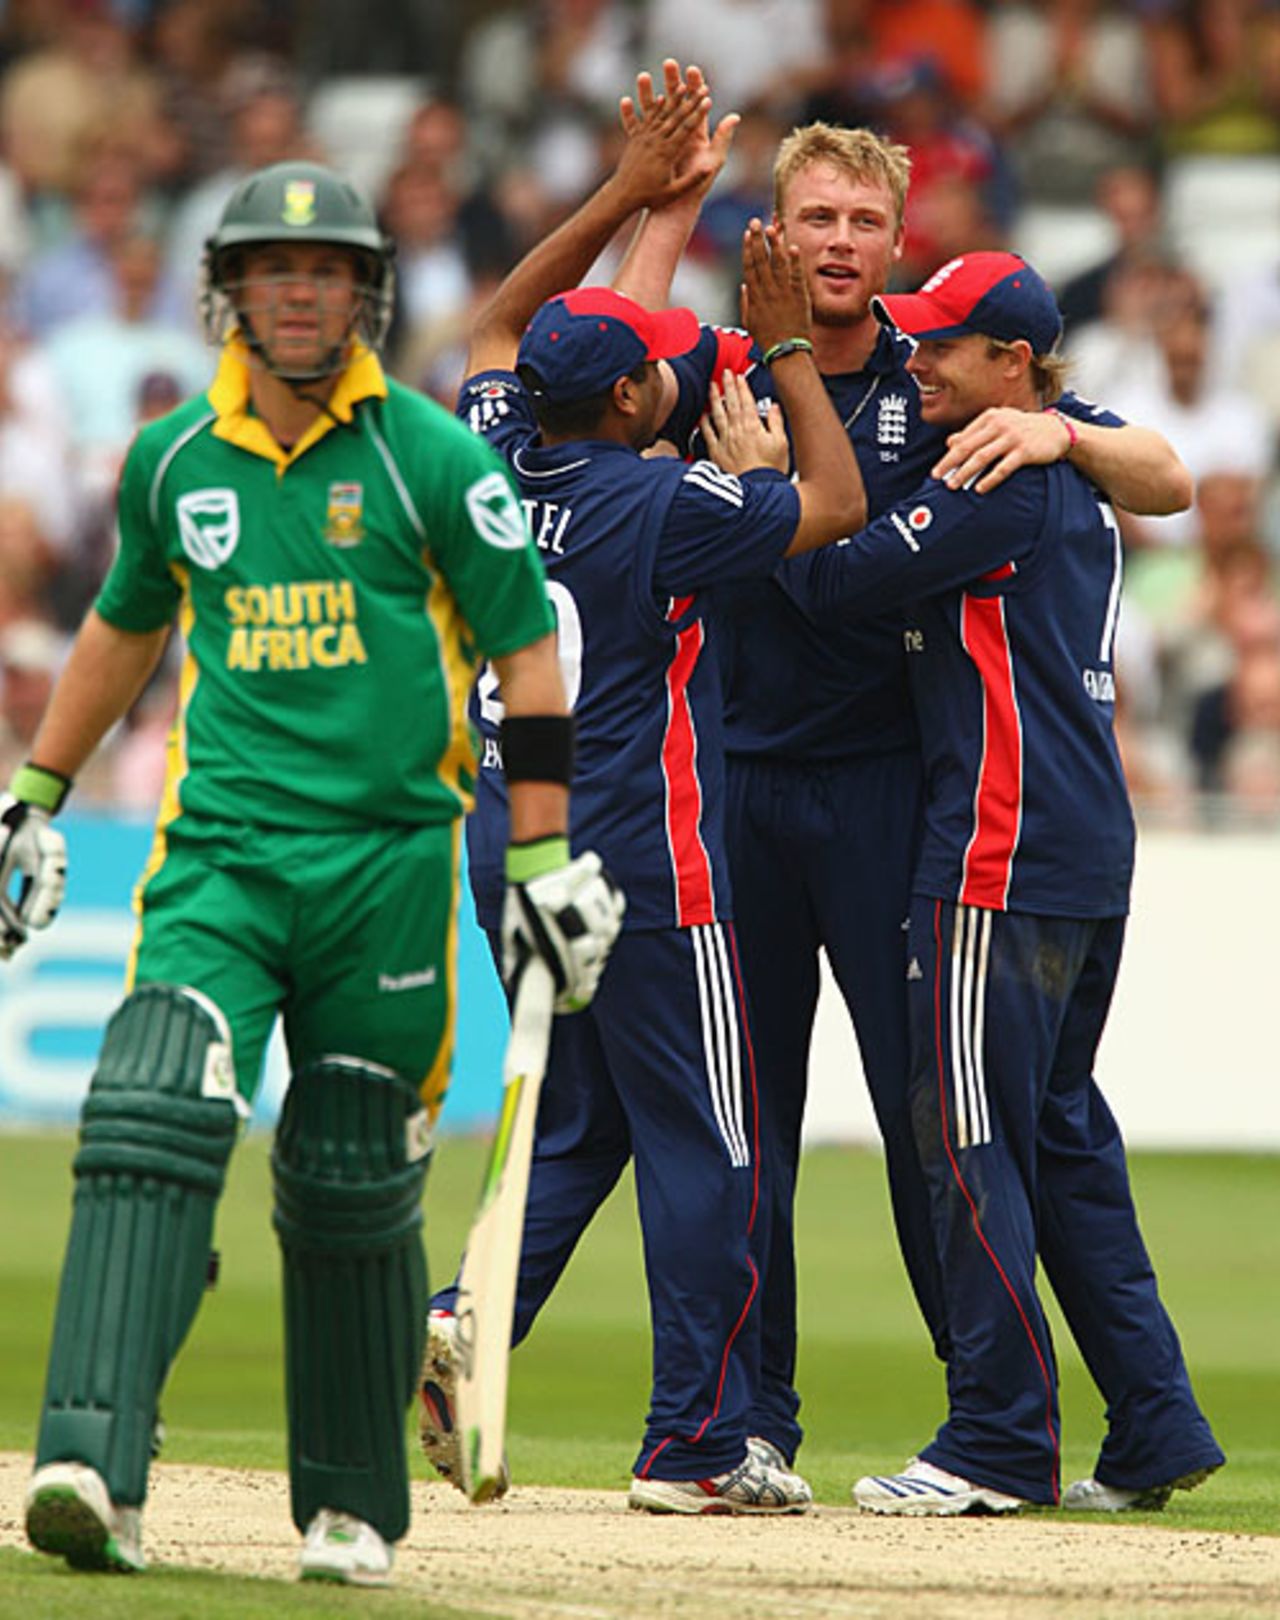 AB de Villiers trudges off as Andrew Flintoff celebrates another wicket, England v South Africa, 2nd ODI, Trent Bridge, August 26, 2008